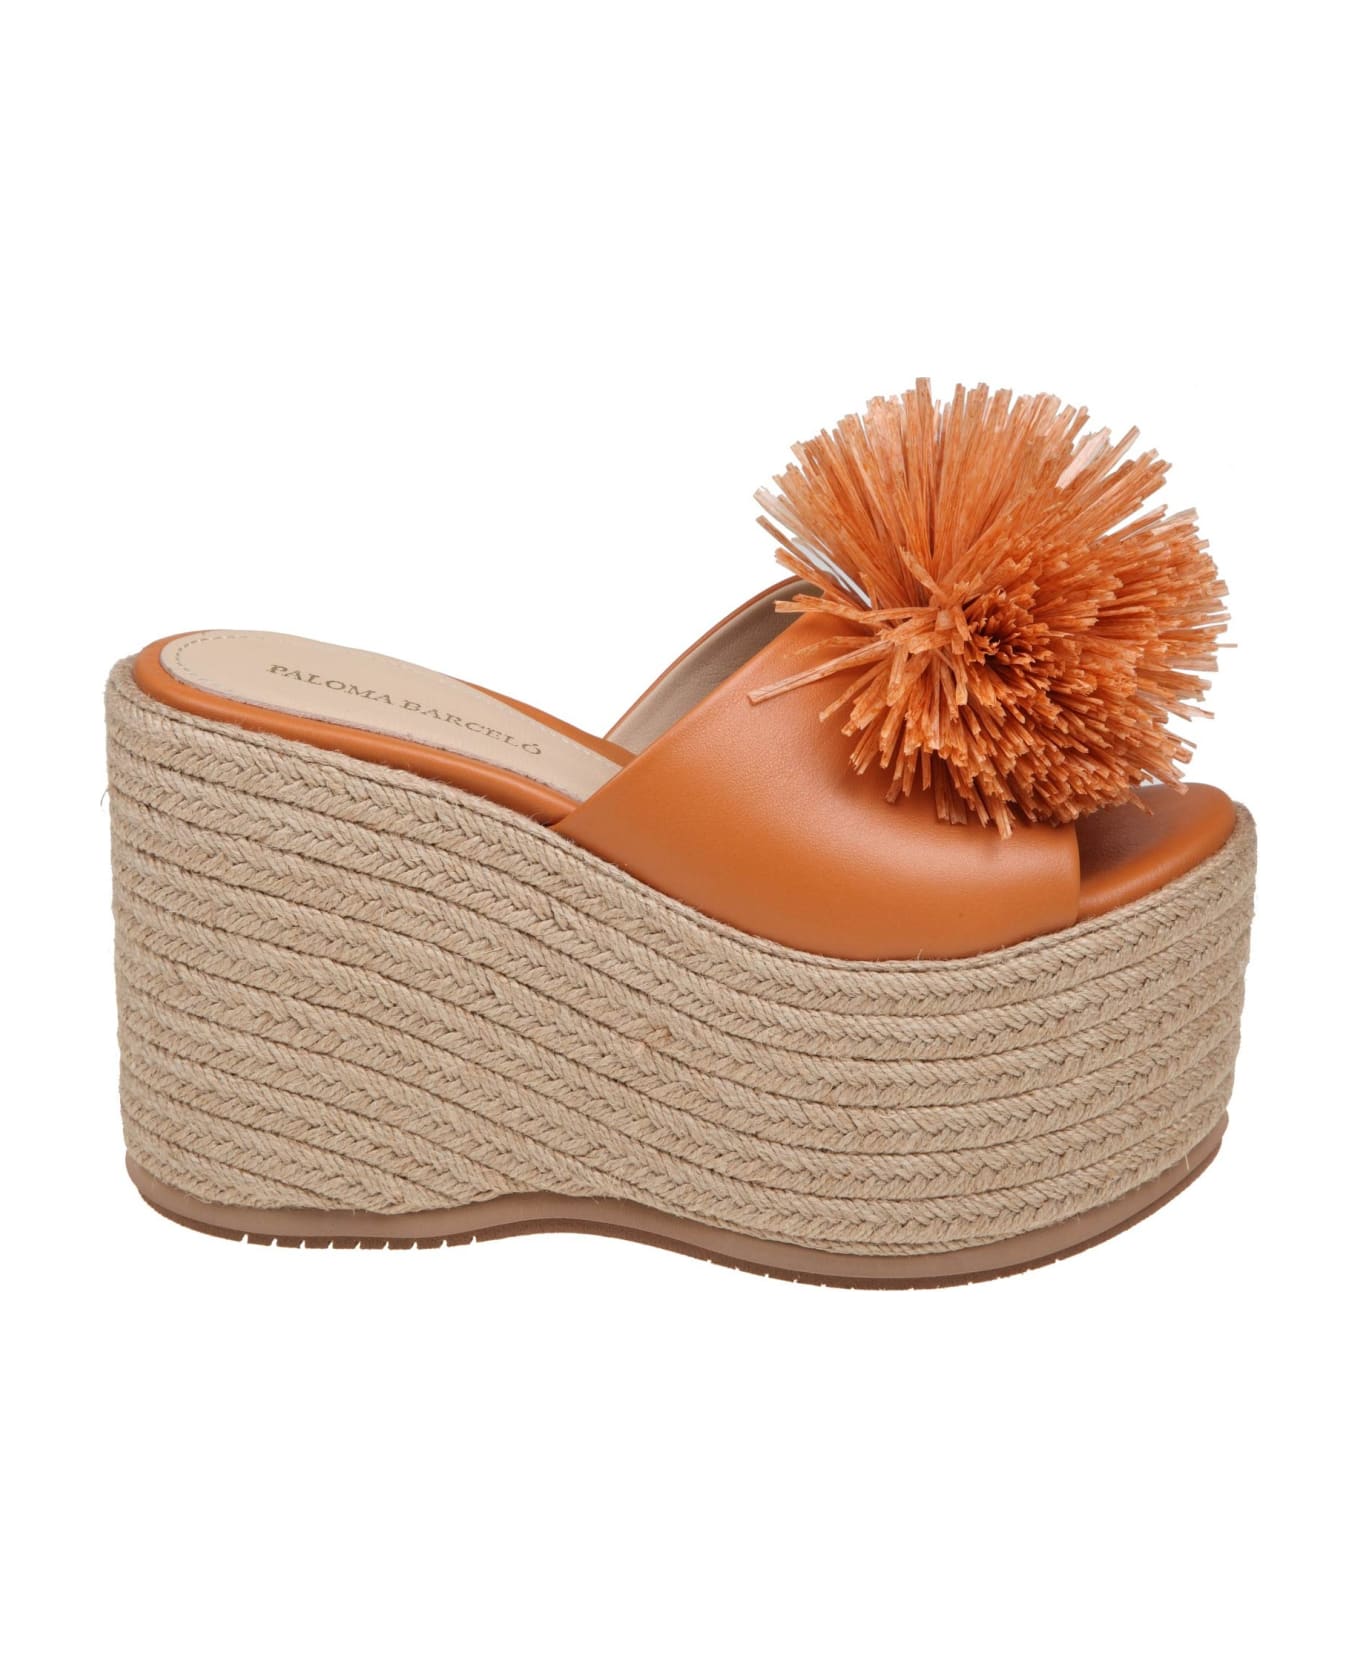 Paloma Barceló Lala Mules In Ocher Color Leather サンダル